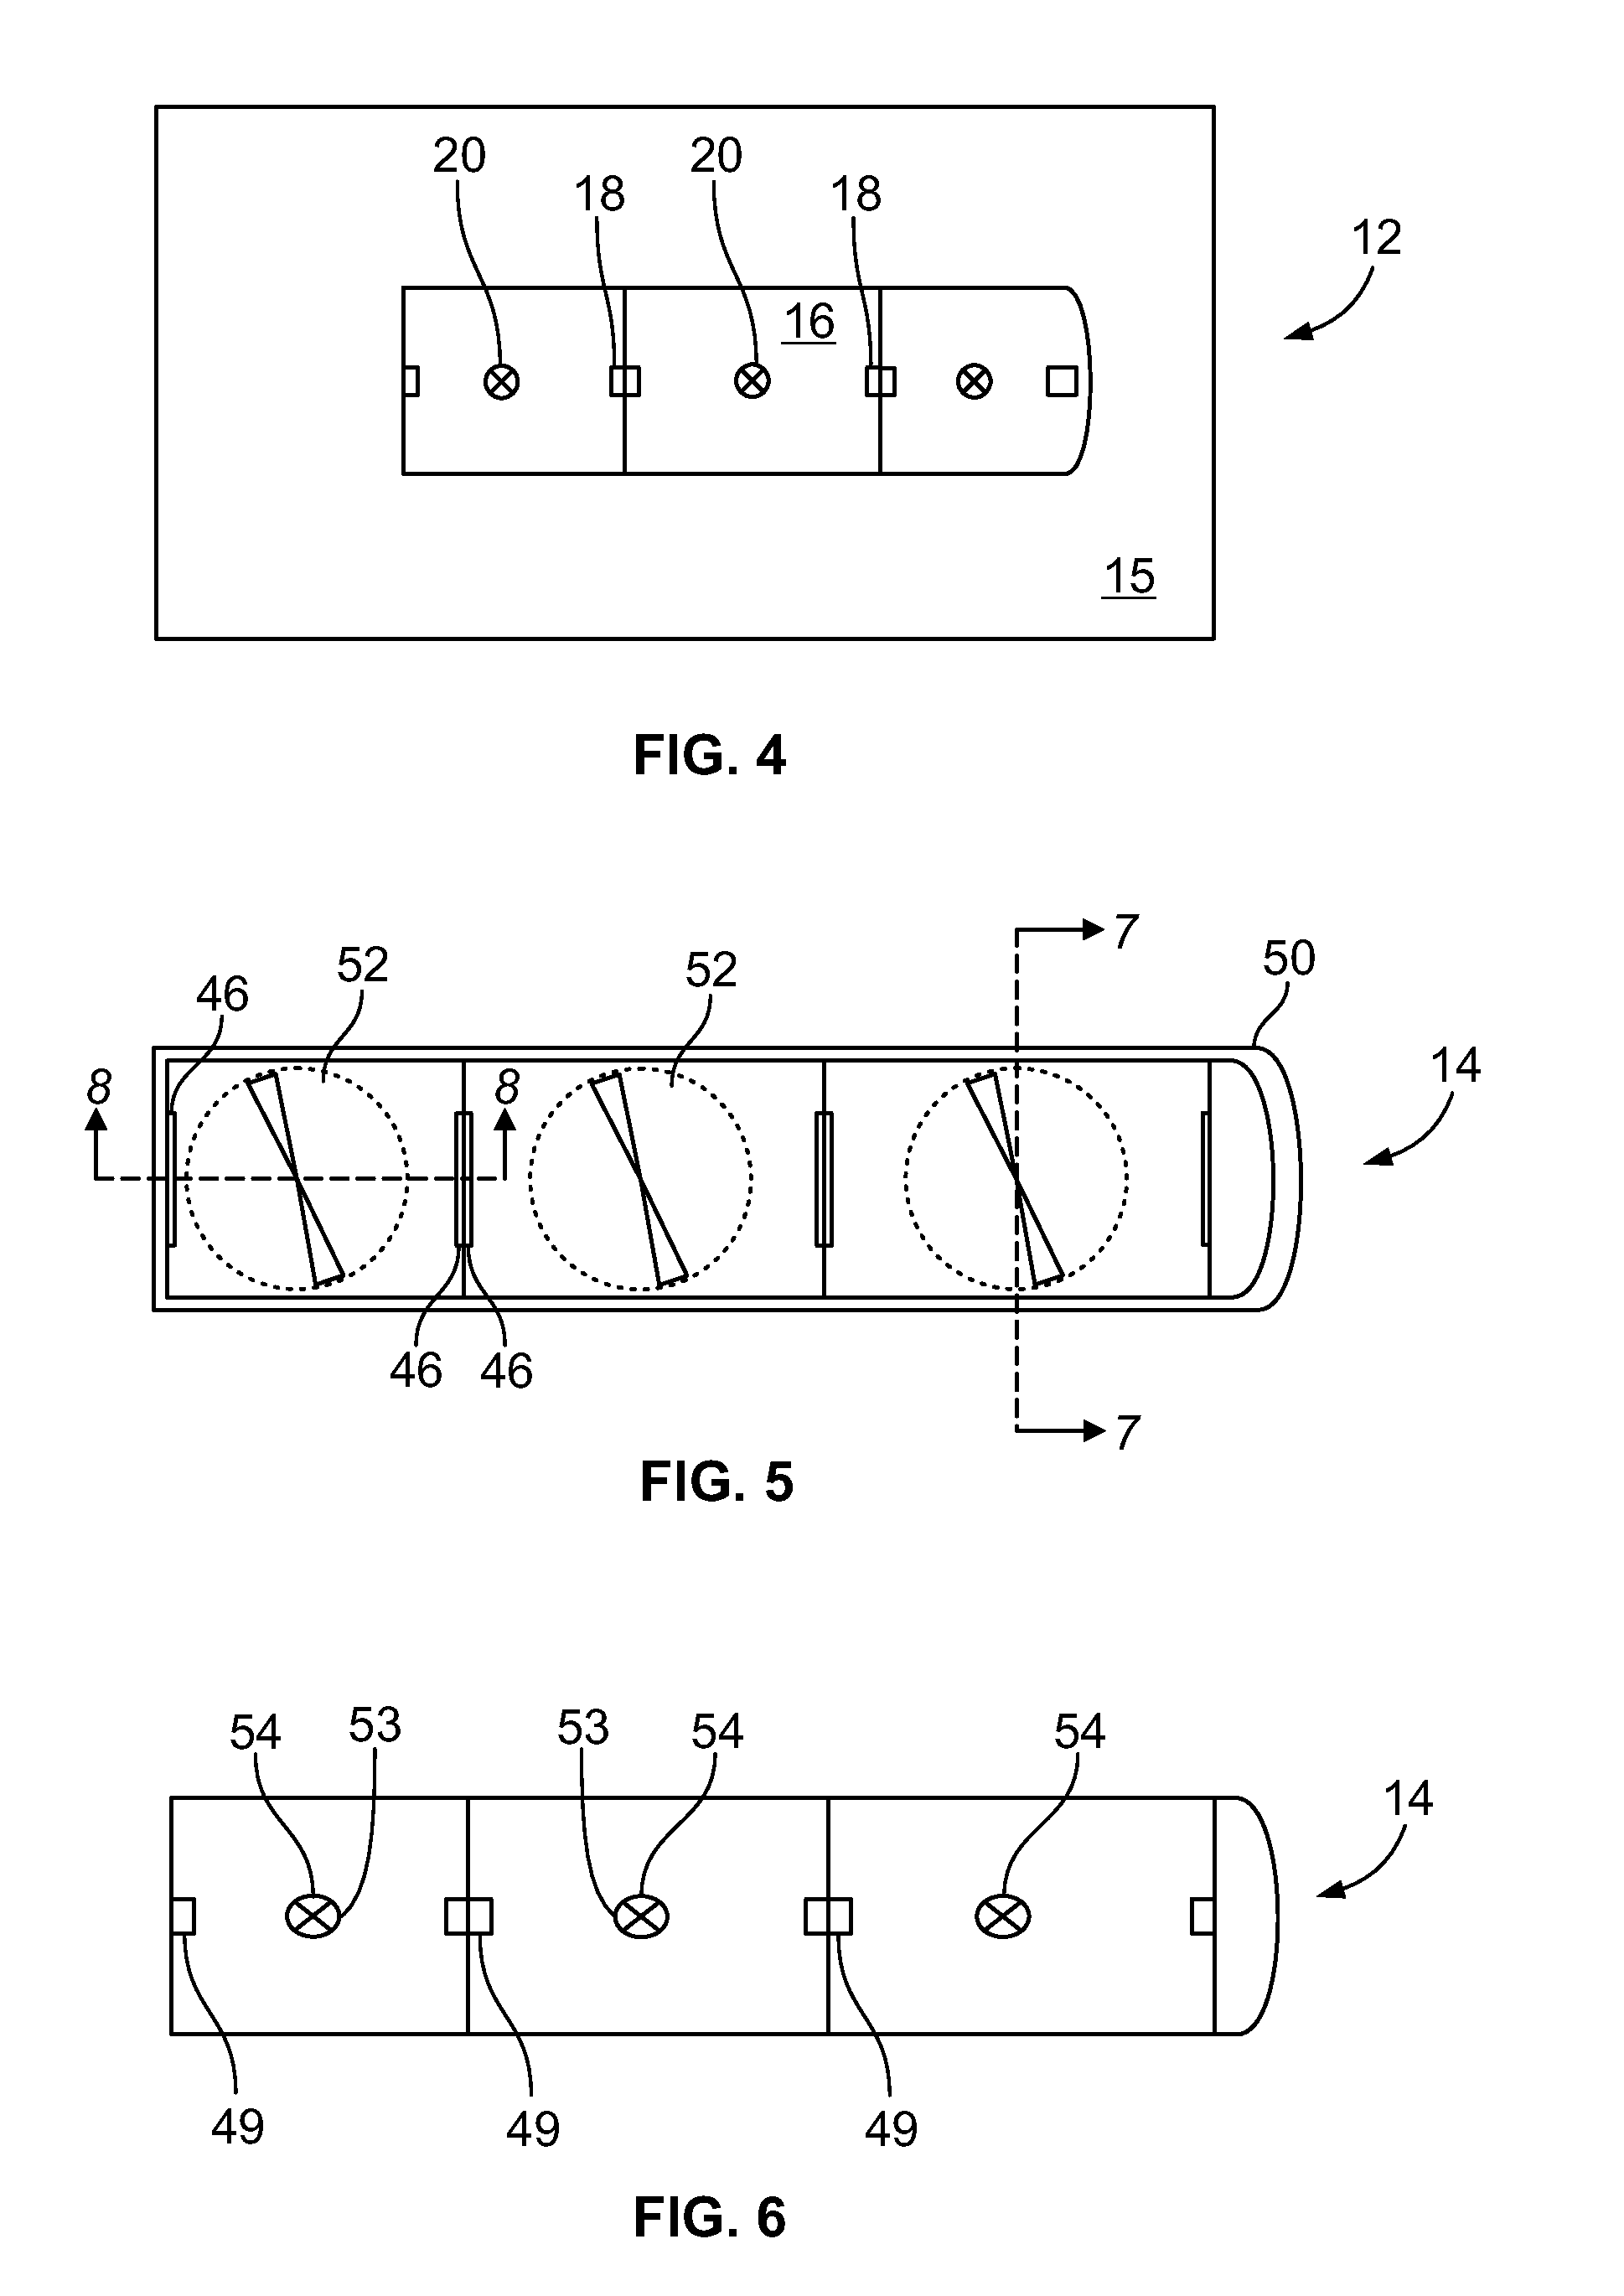 Antigen detection system and methods of use